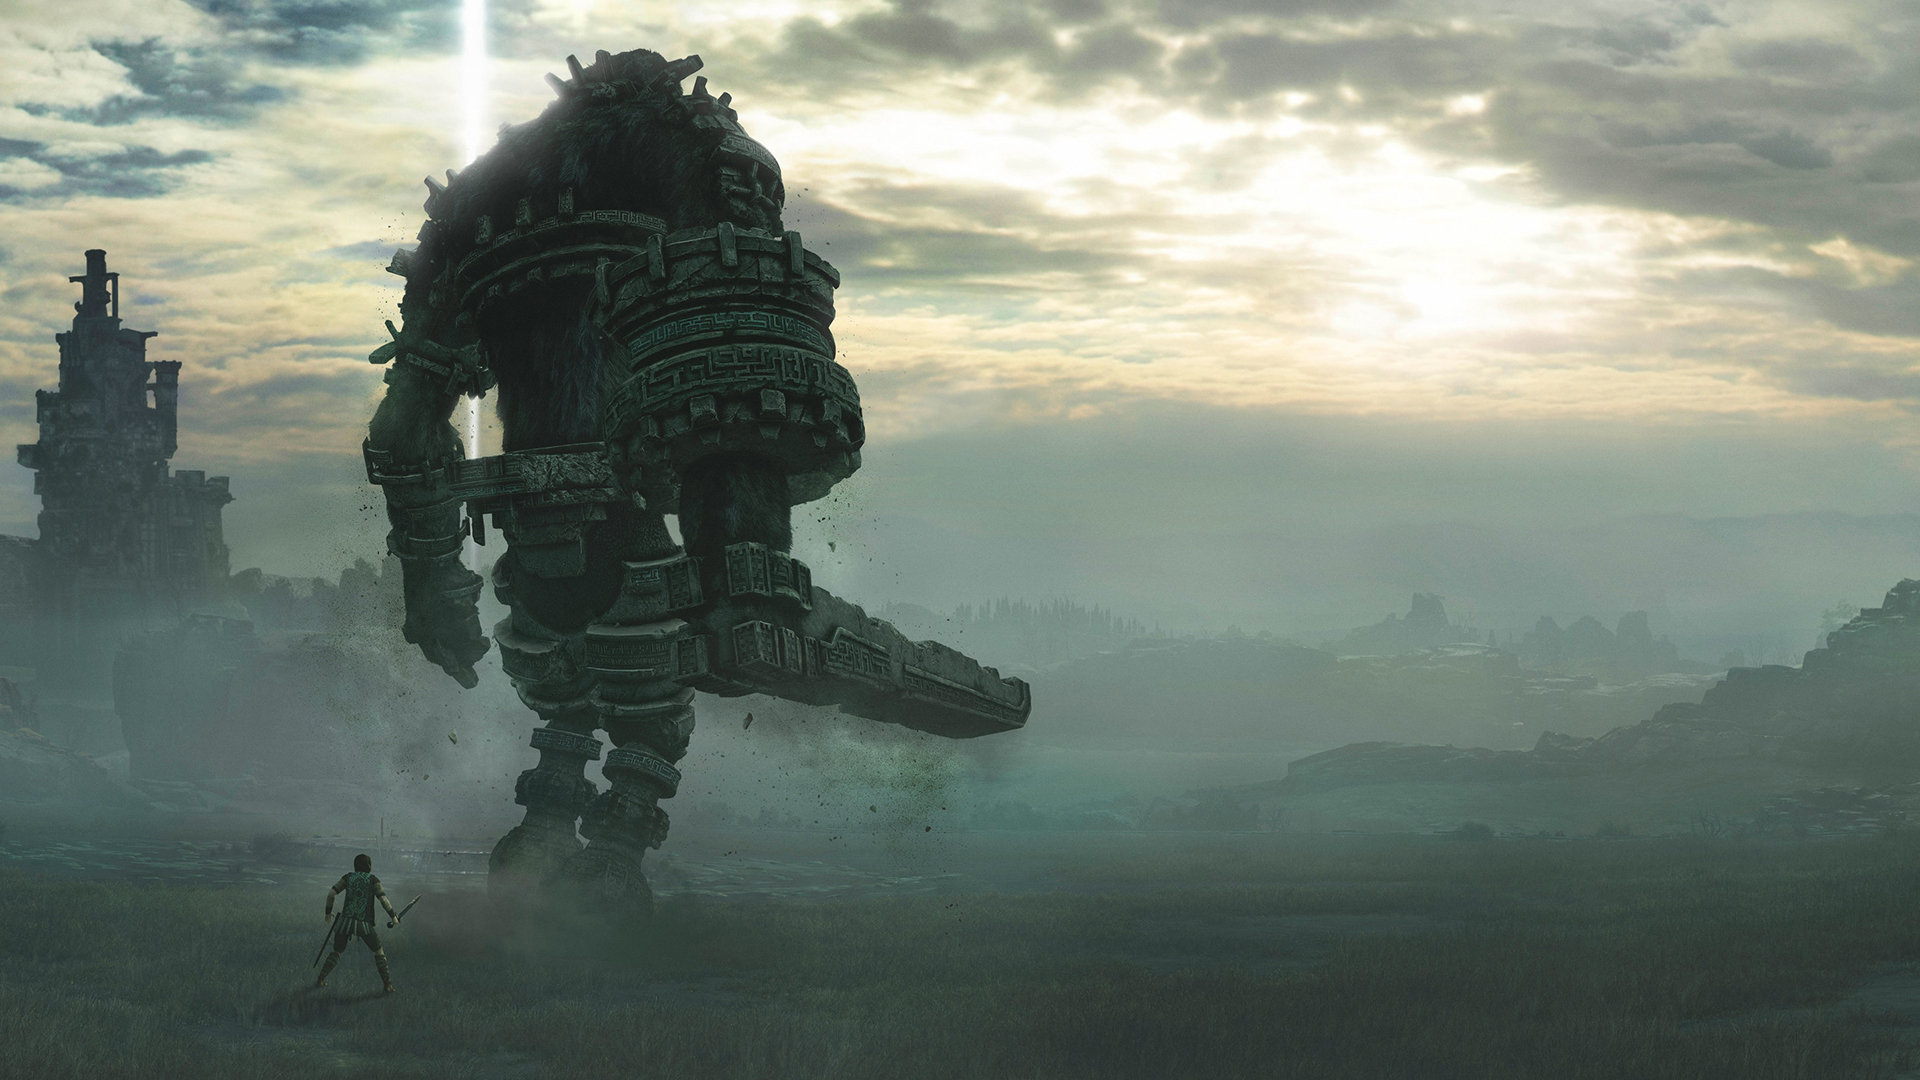 Shadow of the colossus wallpaper